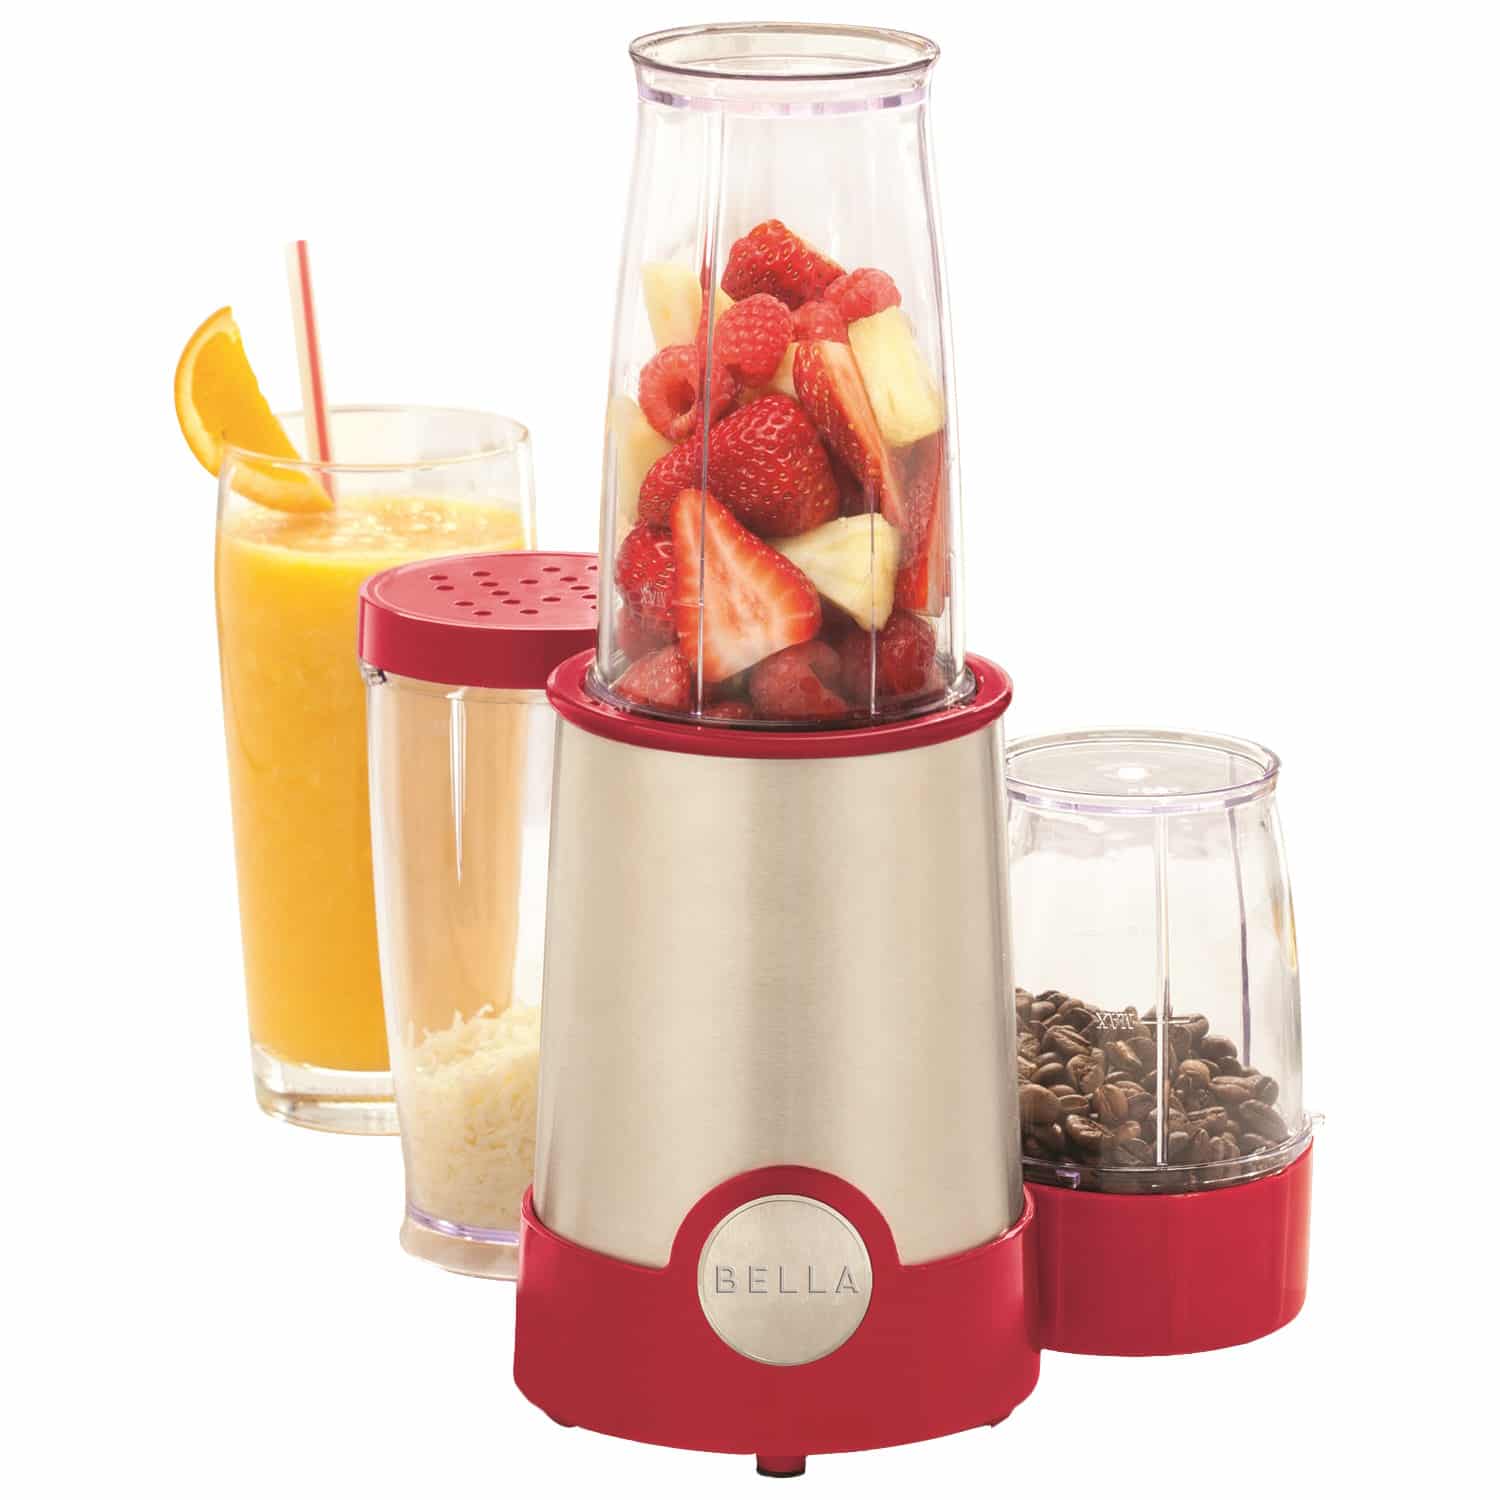 10 Best Blenders For Smoothies in 2017